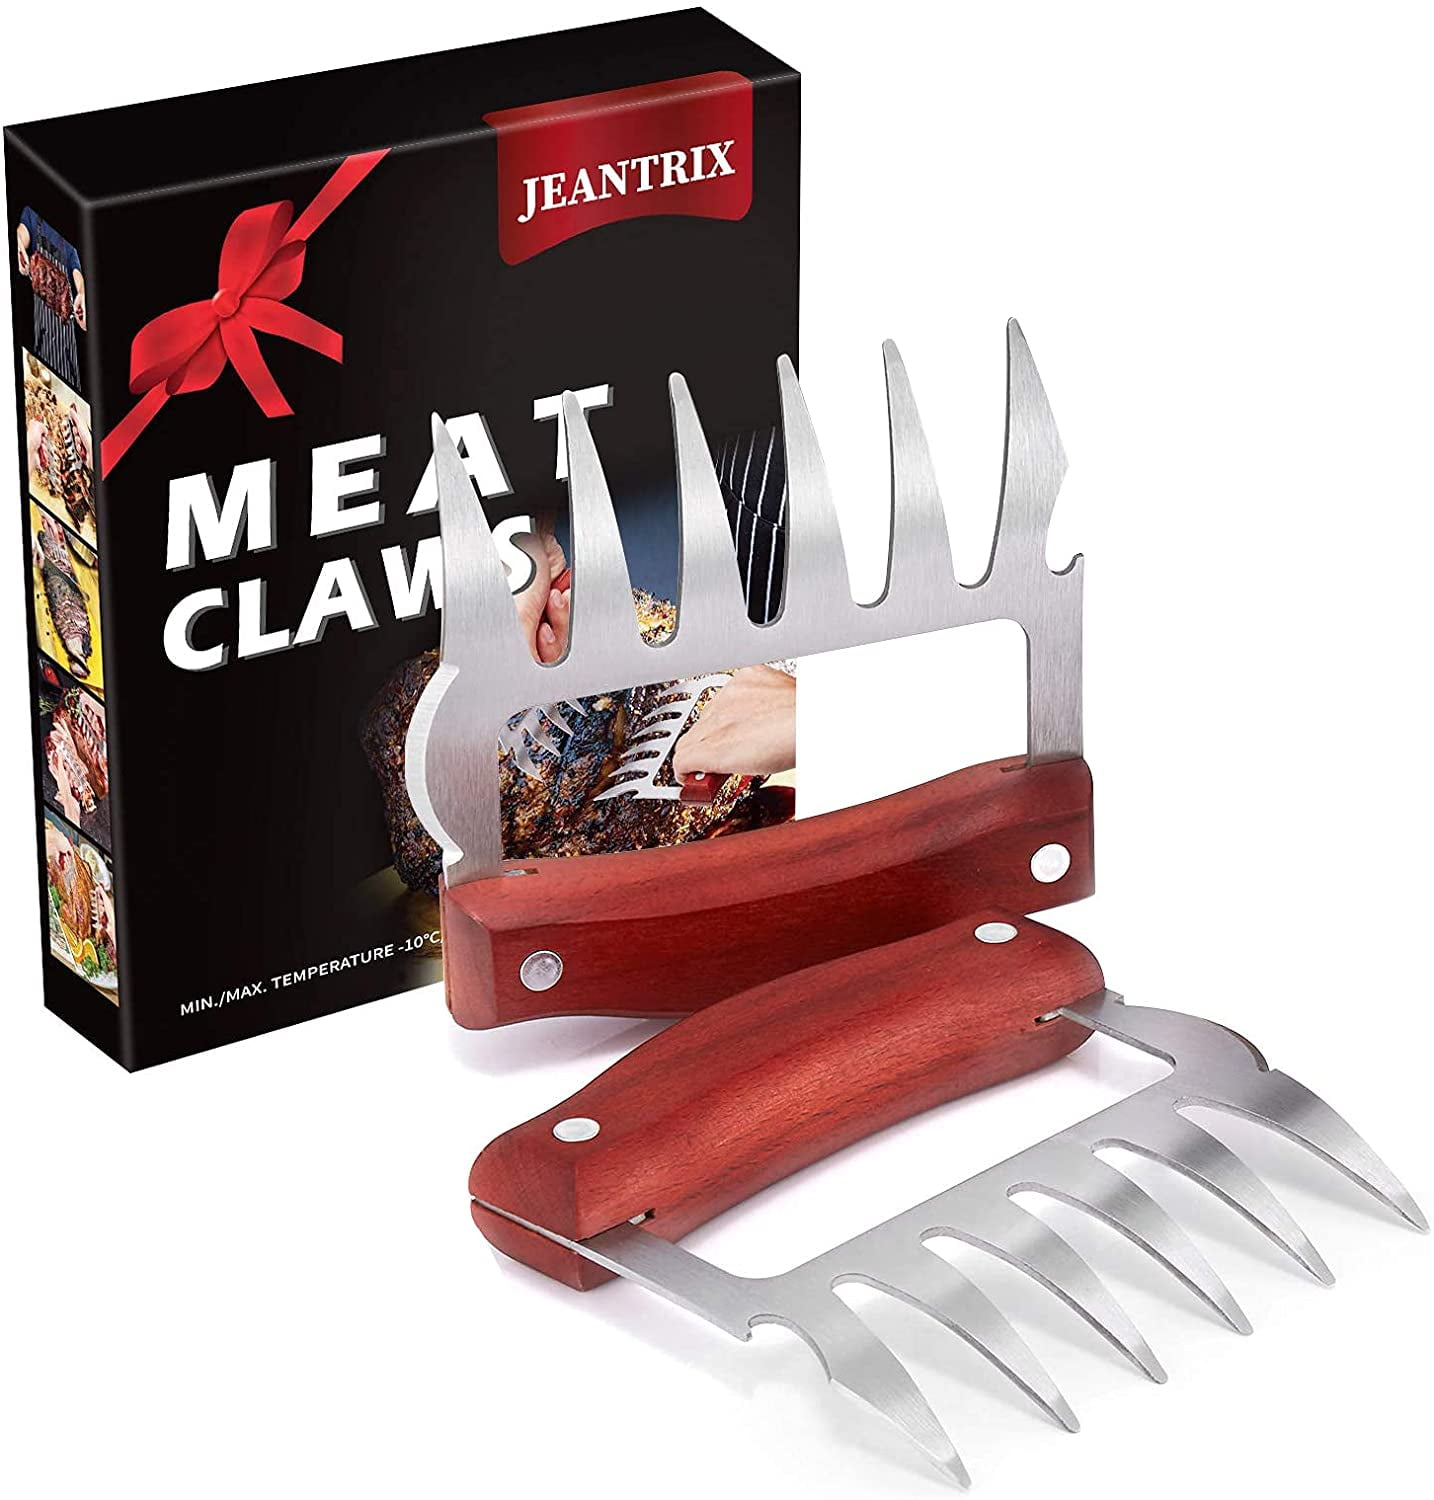 Meat Claws Stainless Steel Claw Meat Shredder With Wood Handle